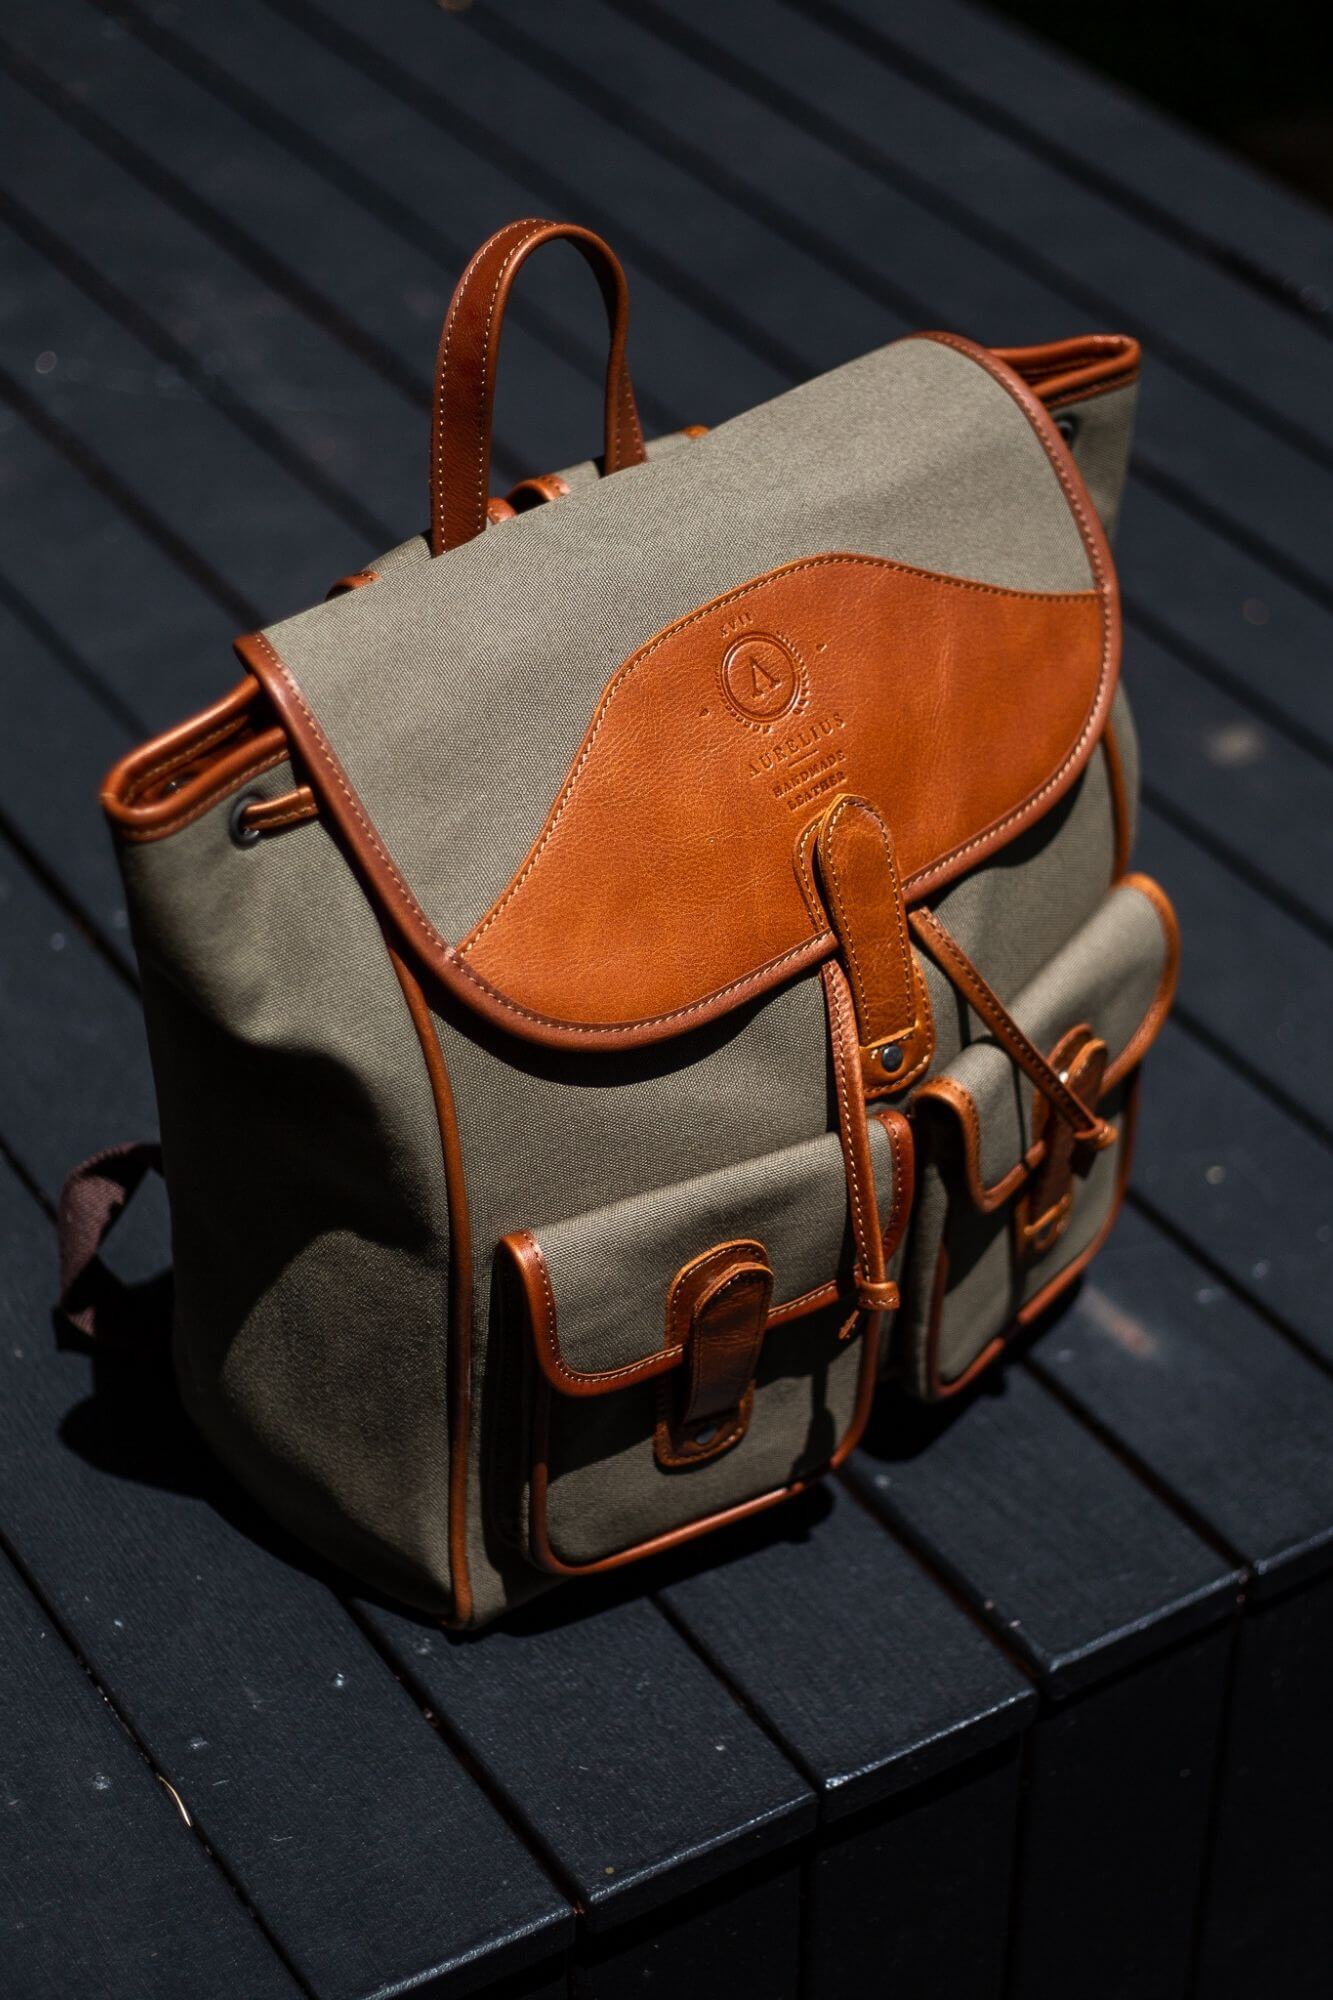 Aurelius Leather Leather Bag Backpack Byron Canvas and Leather Backpack